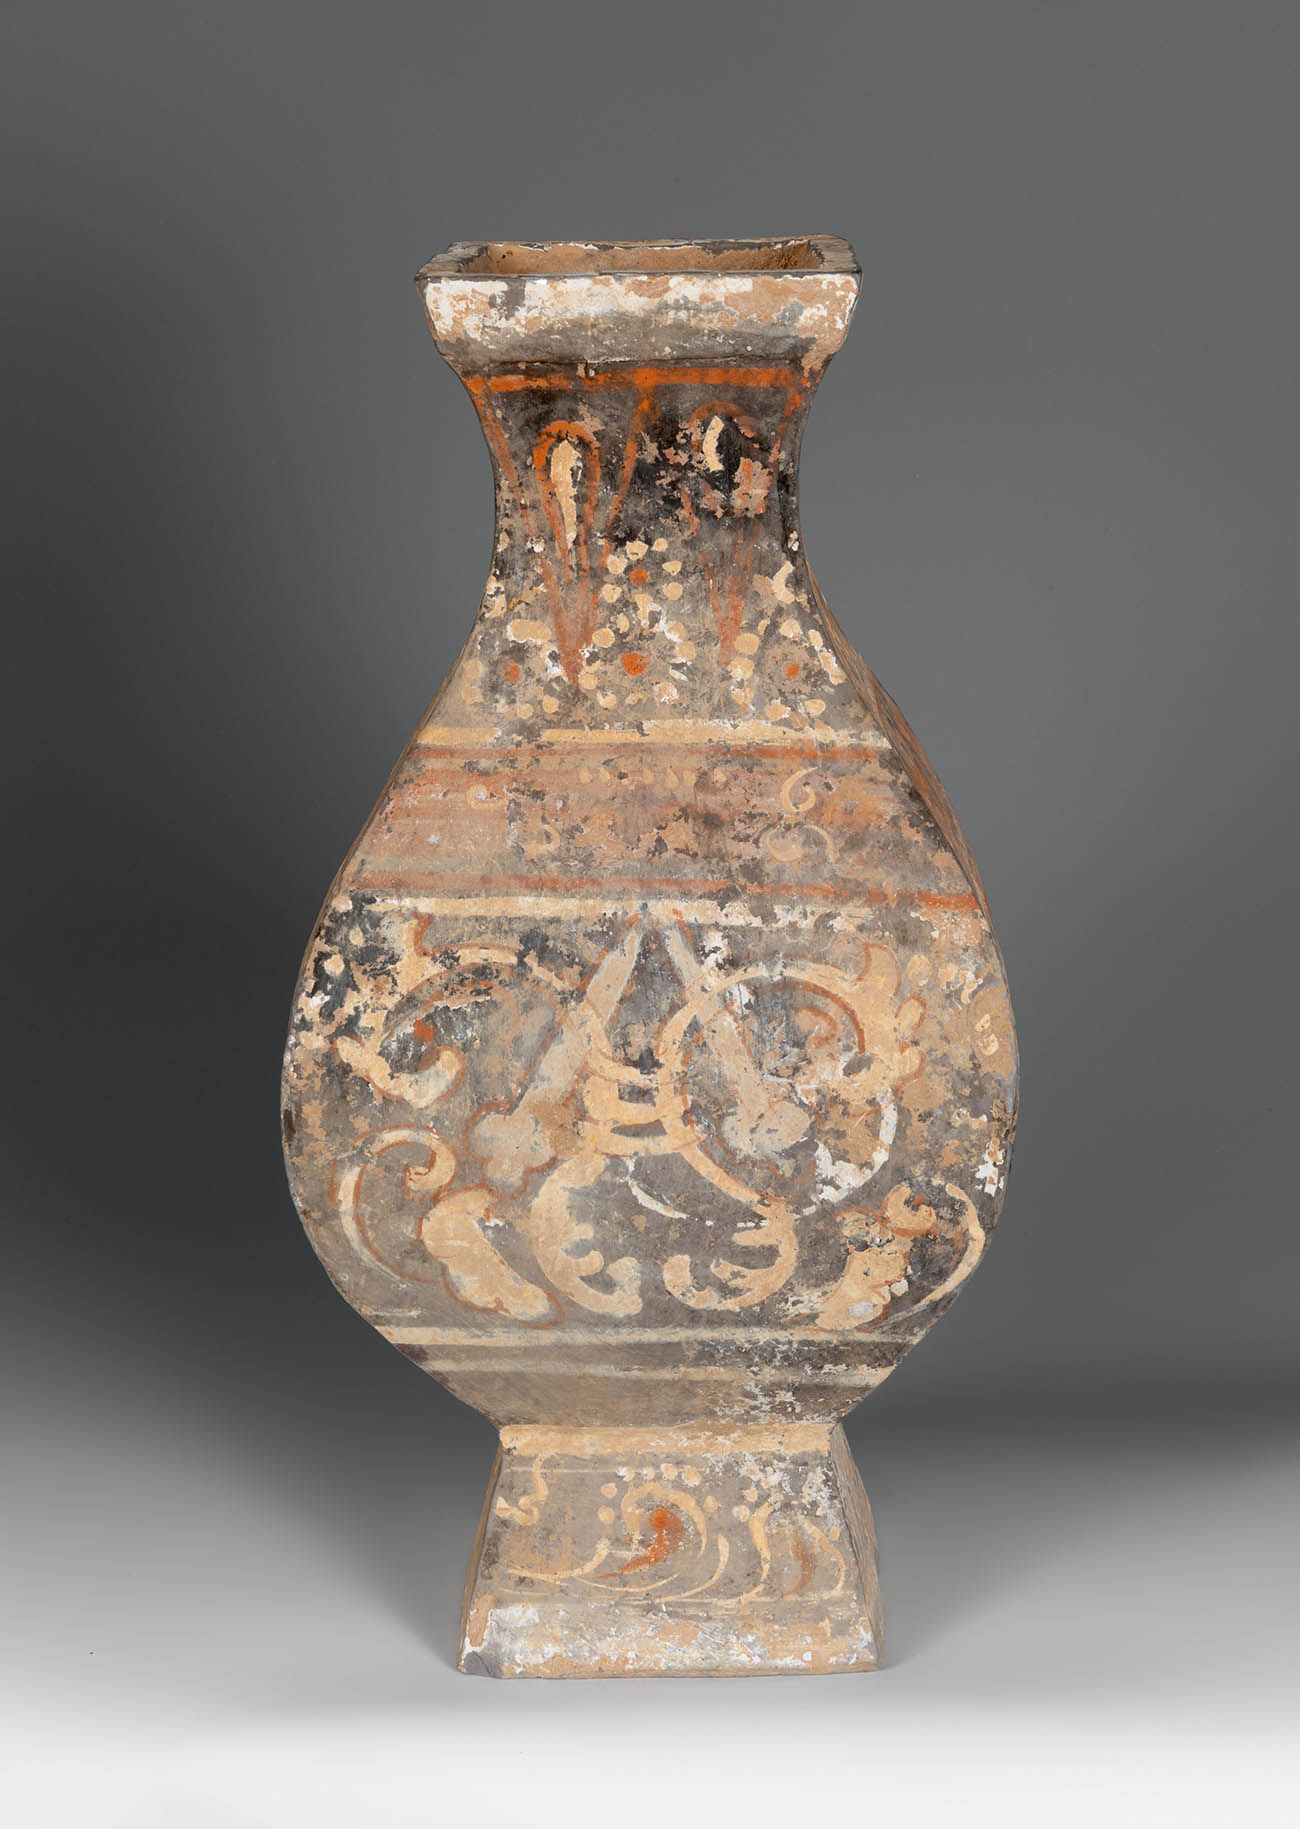 Null Vessel. China, Shang Dynasty, 1,600 BC-1,100 BC.
Decorated ceramic.
Size: 3&hellip;